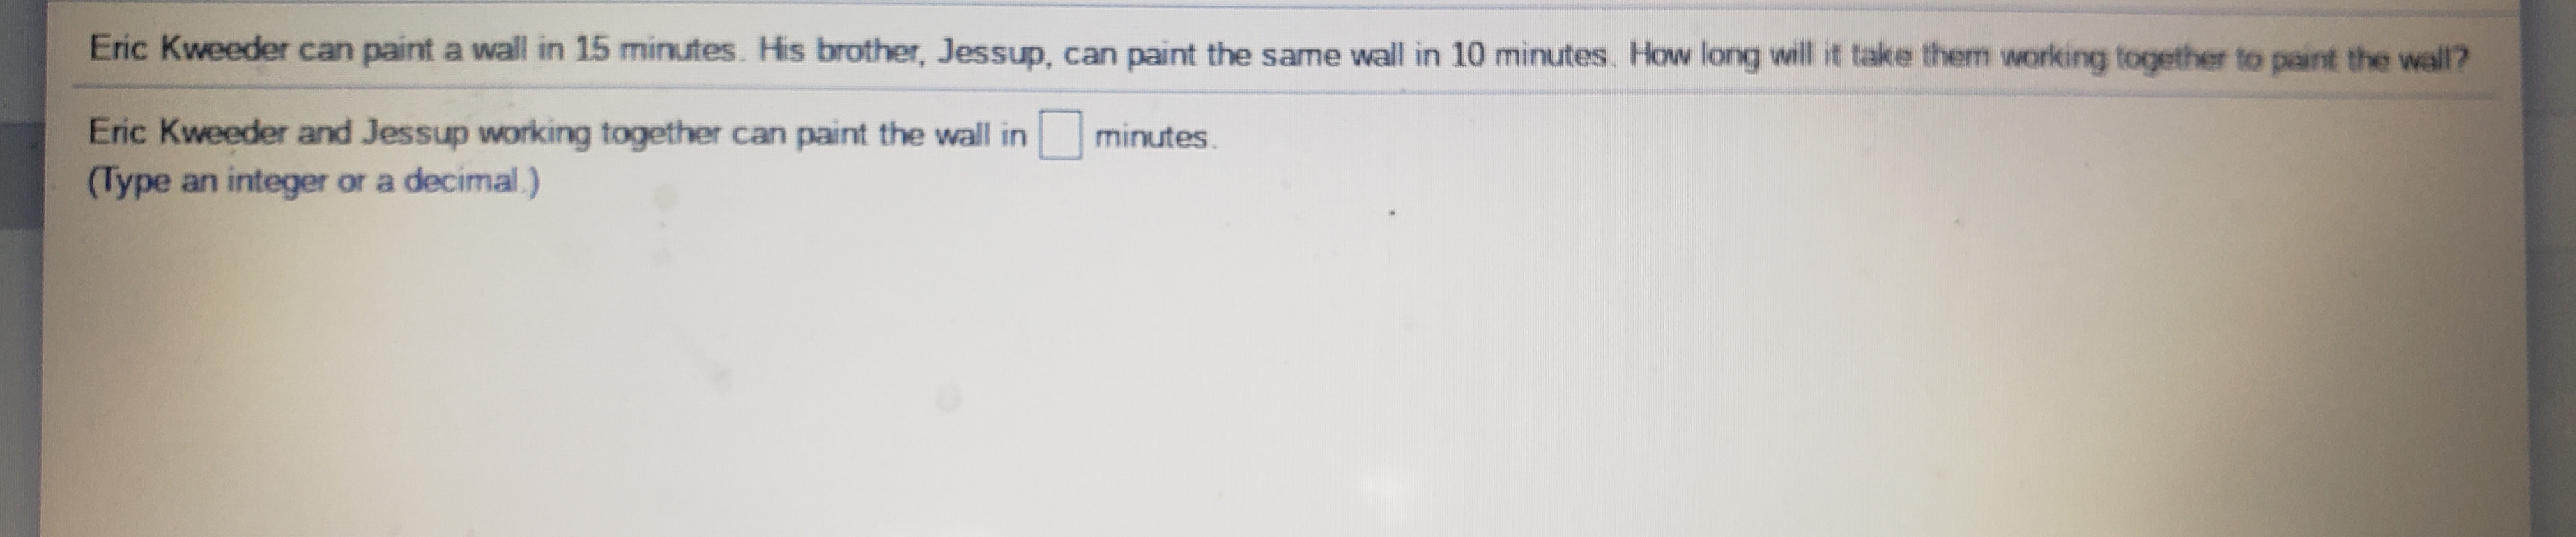 Eric Kweeder can paint a wall in 15 minutes. His brother, Jessup, can paint the same wall in 10 minutes. How long will it take them working together to paint the wall?
Eric Kweeder and Jessup working together can paint the wall inO minutes.
(Type an integer or a decimal.)
